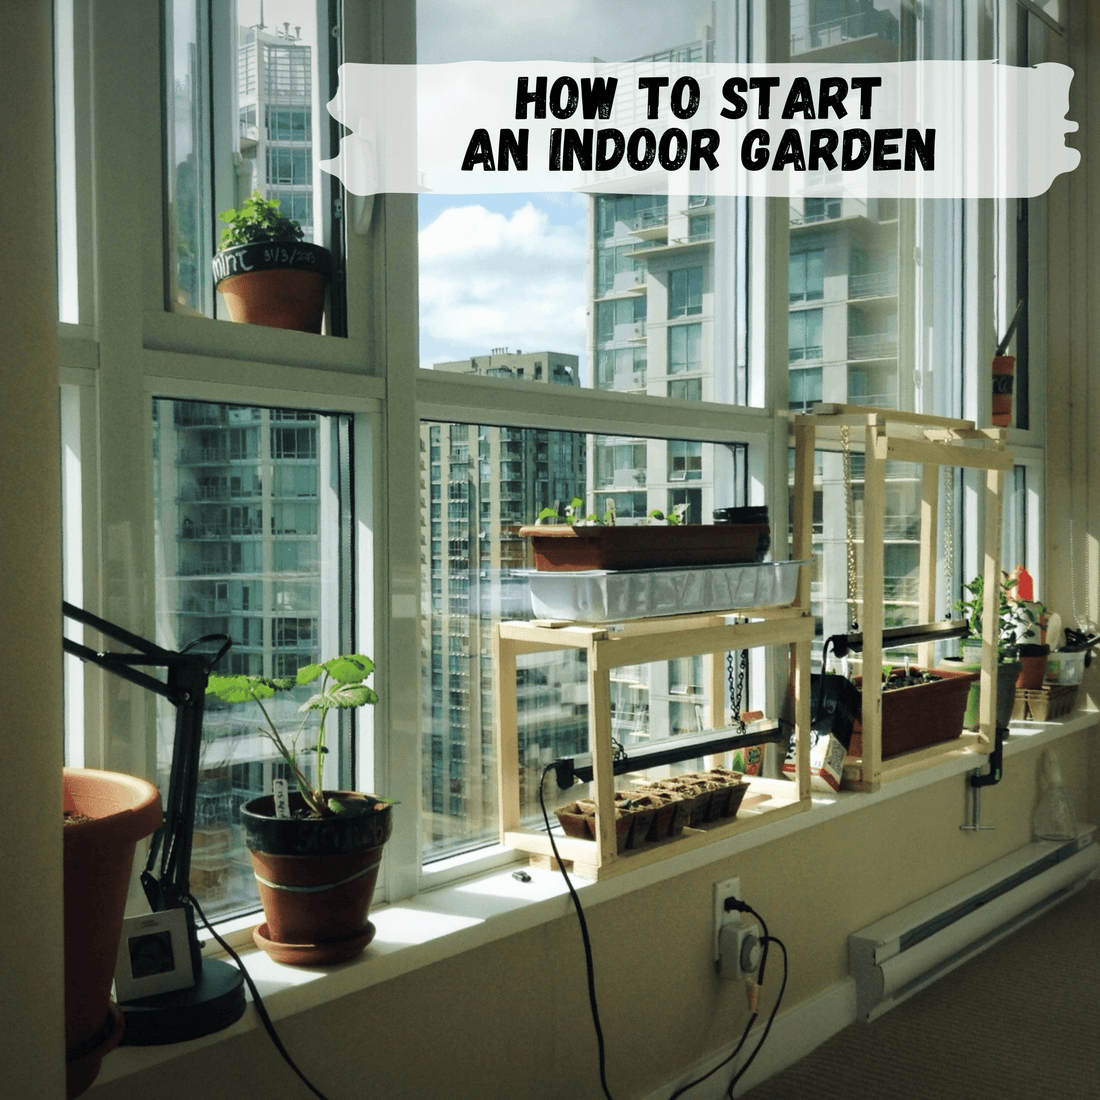 herb garden with grow lights on windowsill in apartment.  City skyline in the background.